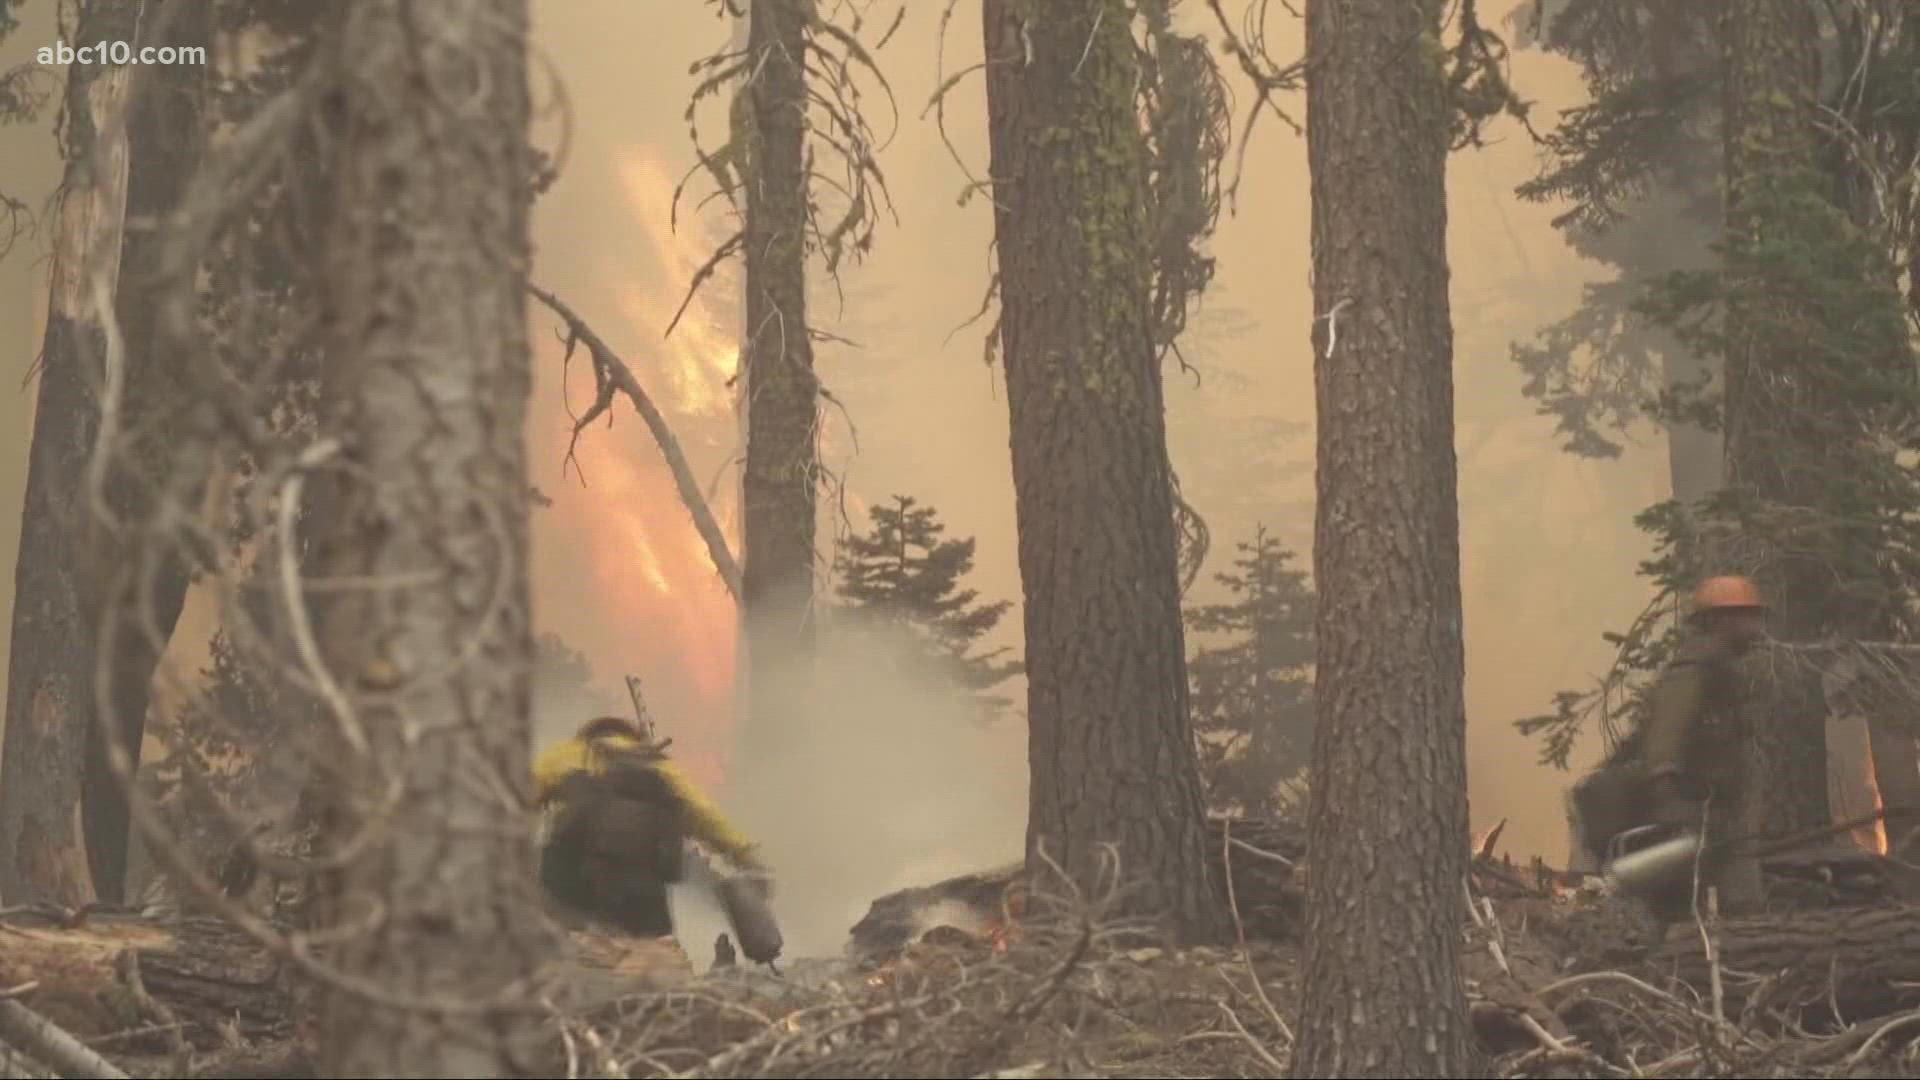 Following a strong weekend of firefighting, more residents in the South Lake Tahoe area are being let into their homes.